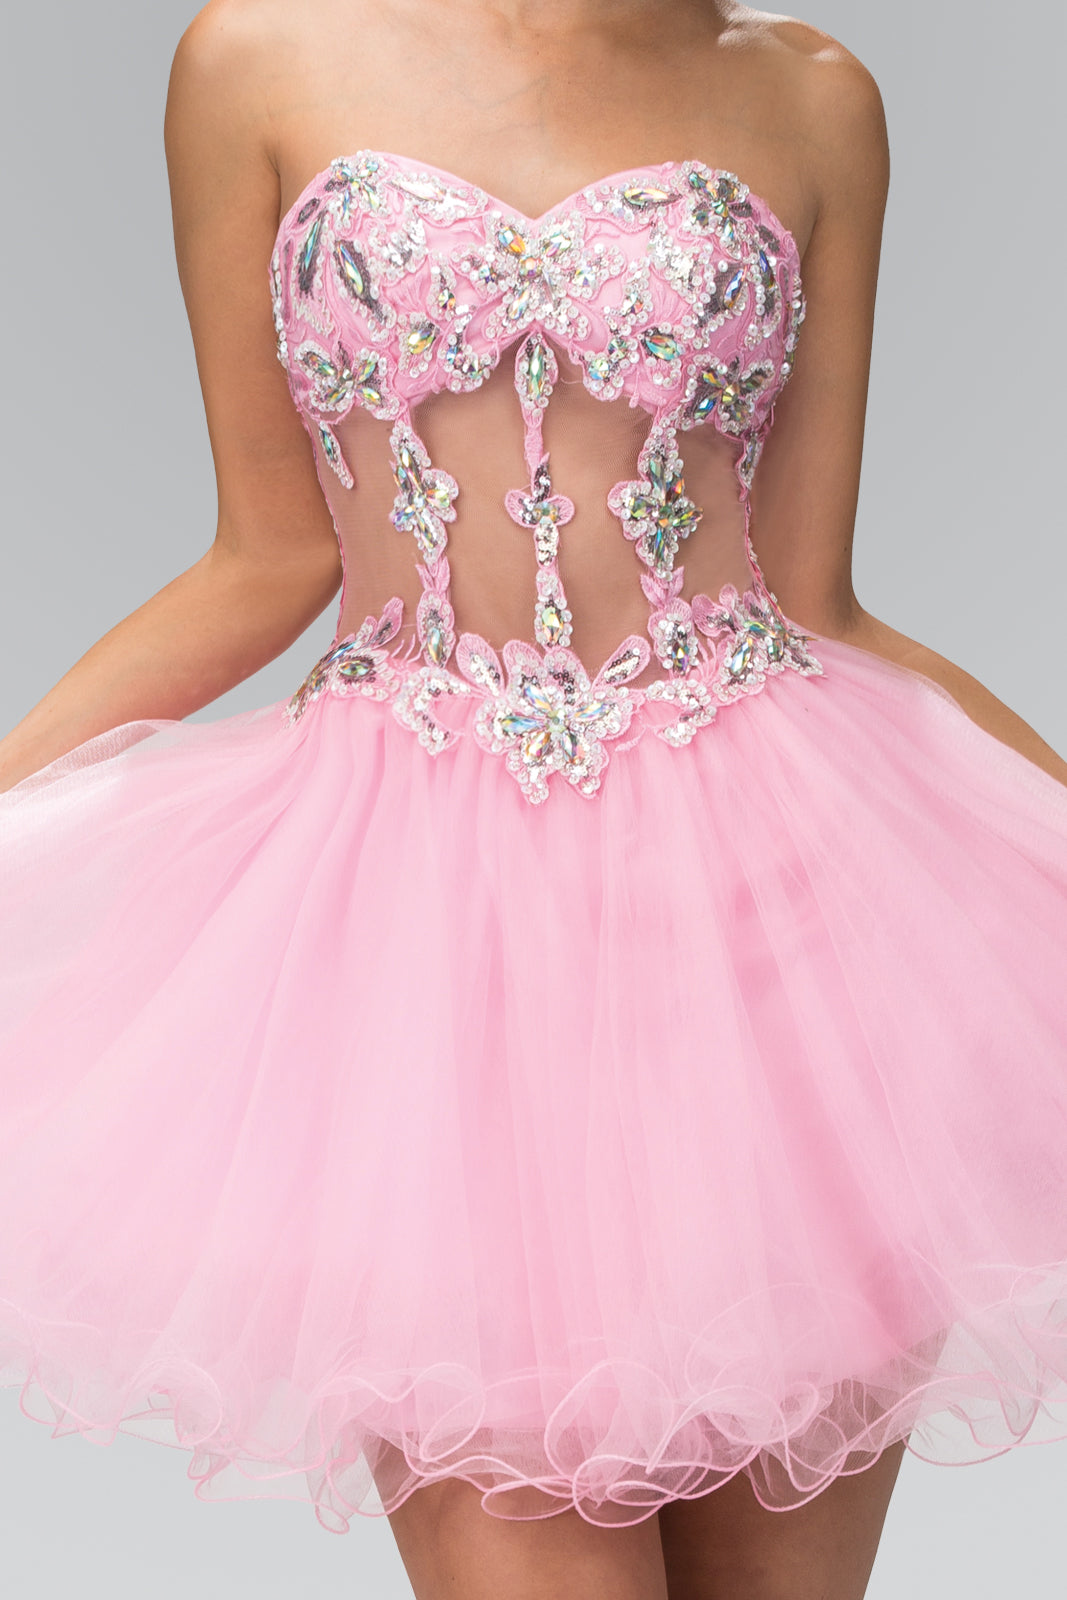 Beaded Strapless Sequined Tulle Short Prom Dress - The Dress Outlet Pink